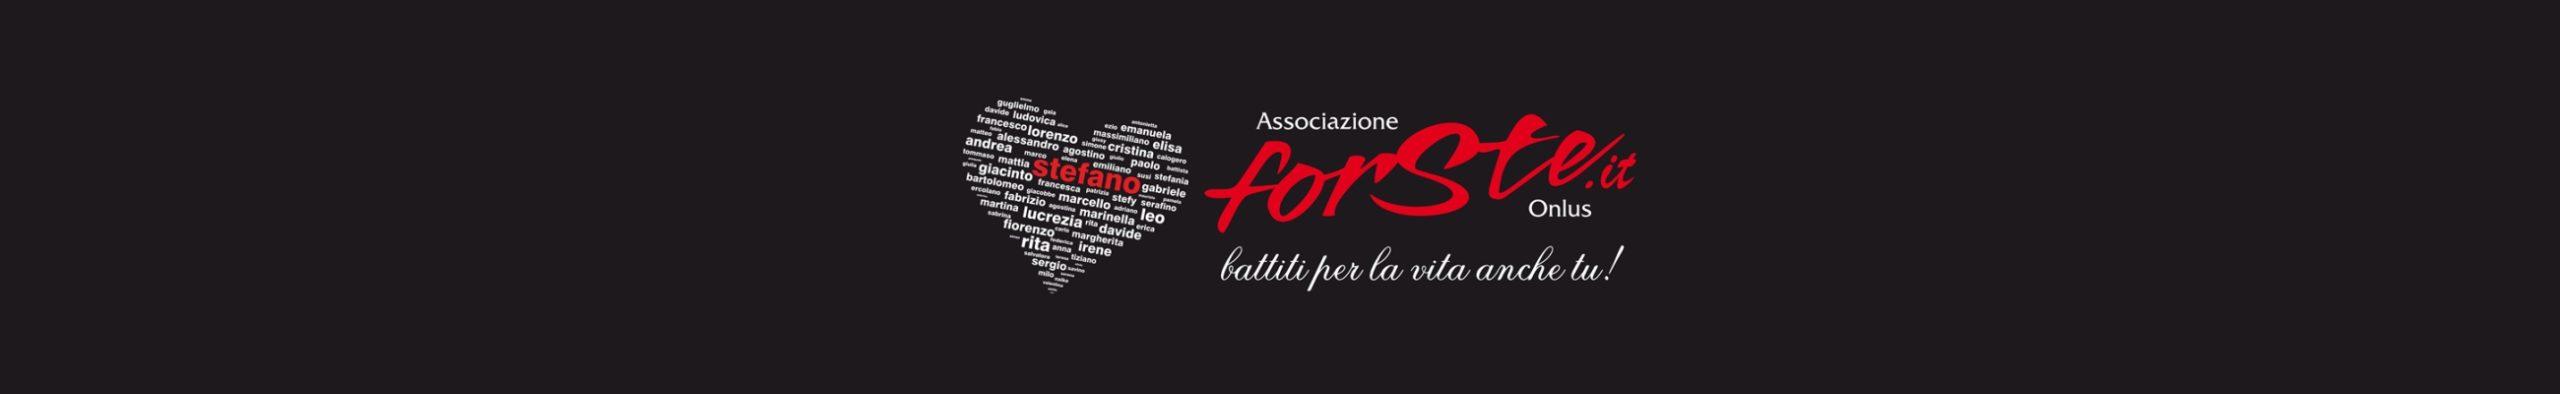 associazione forste scaled